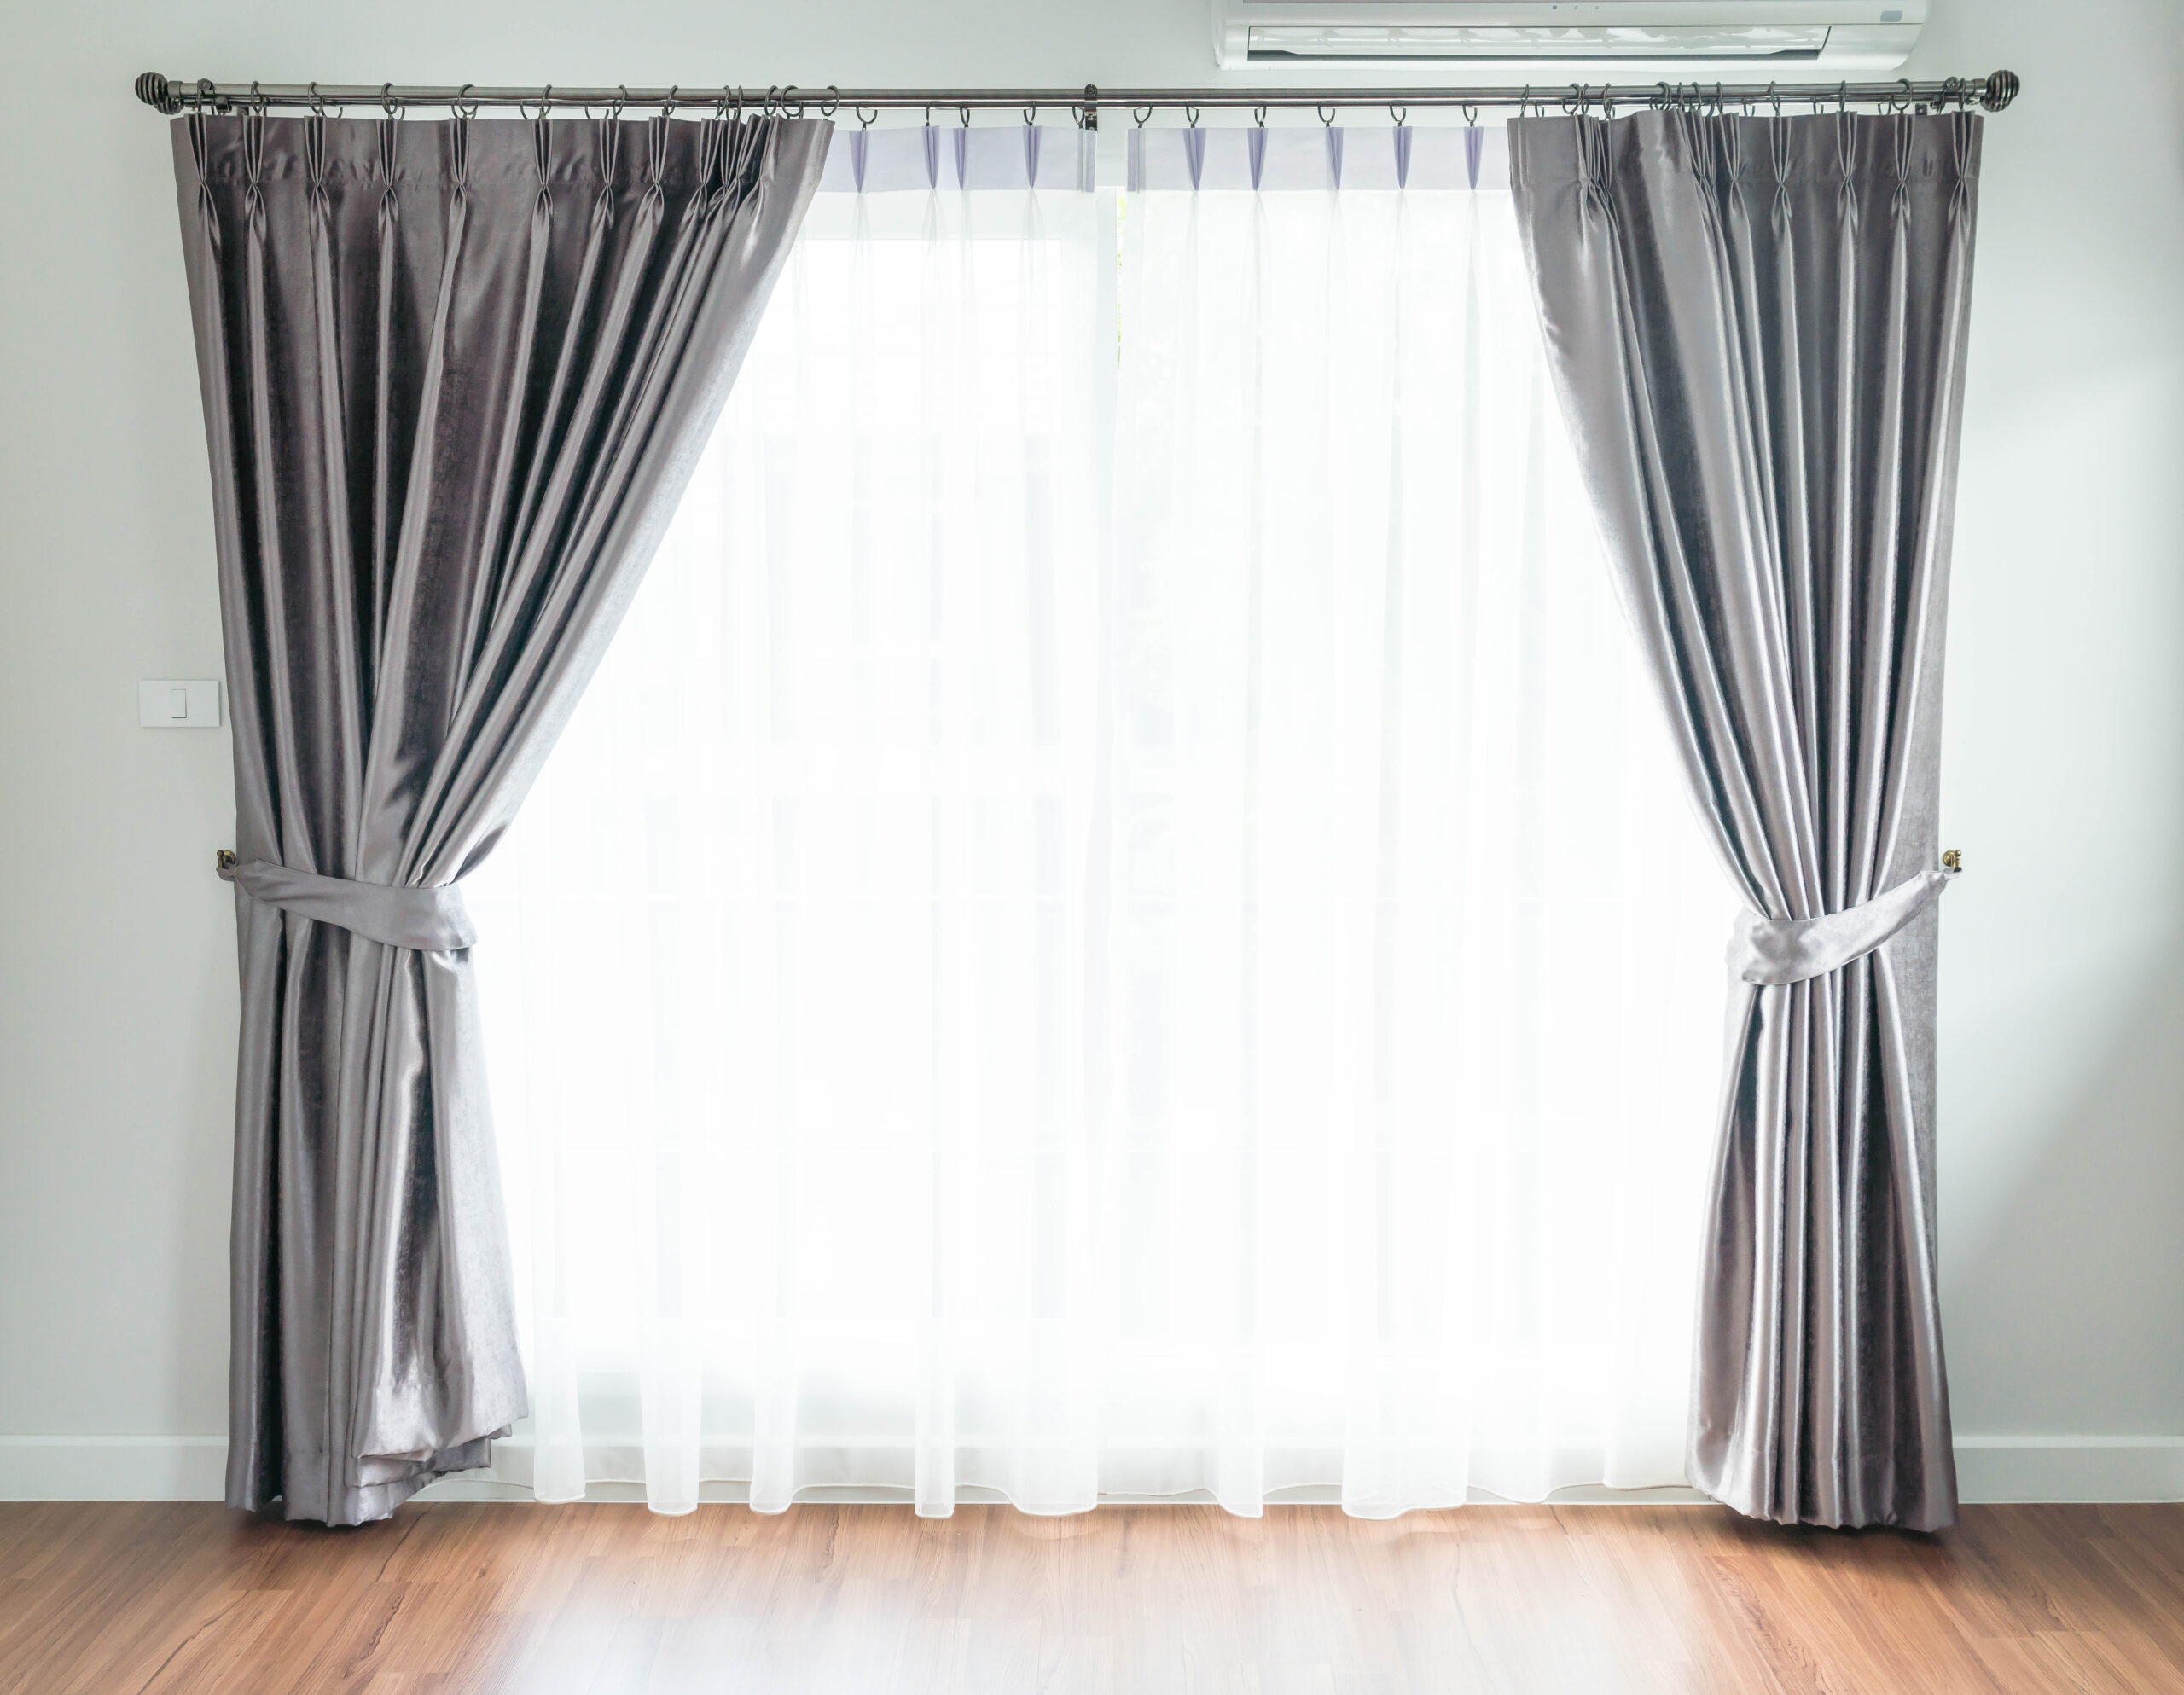 How to Get Wrinkles Out of Curtains